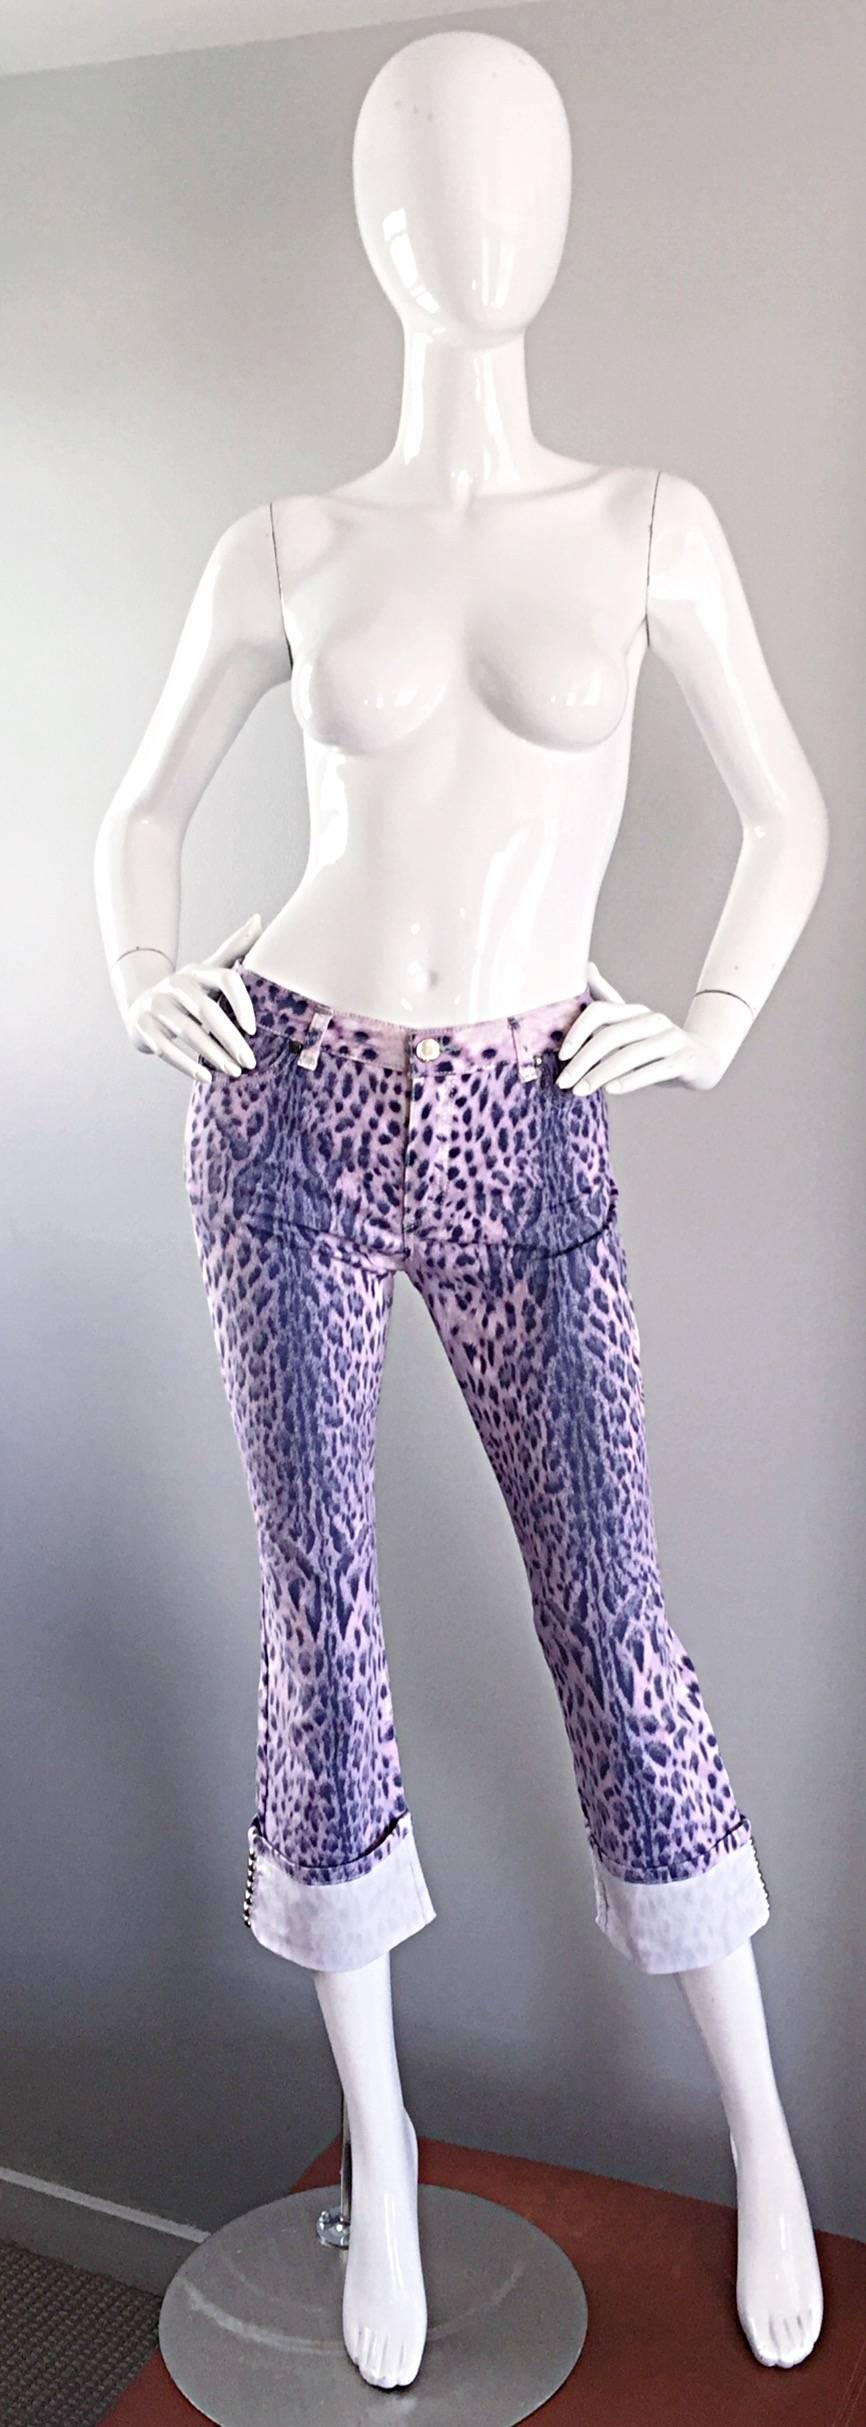 1990s / 90s vintage ROBERTO CAVALLI purple, white and gray/black leopard or cheetah print cropped flared trousers / capris / culottes! Stretch cotton hugs the body in all the right places. Flattering rise is not too low, yet not too high.Just right!